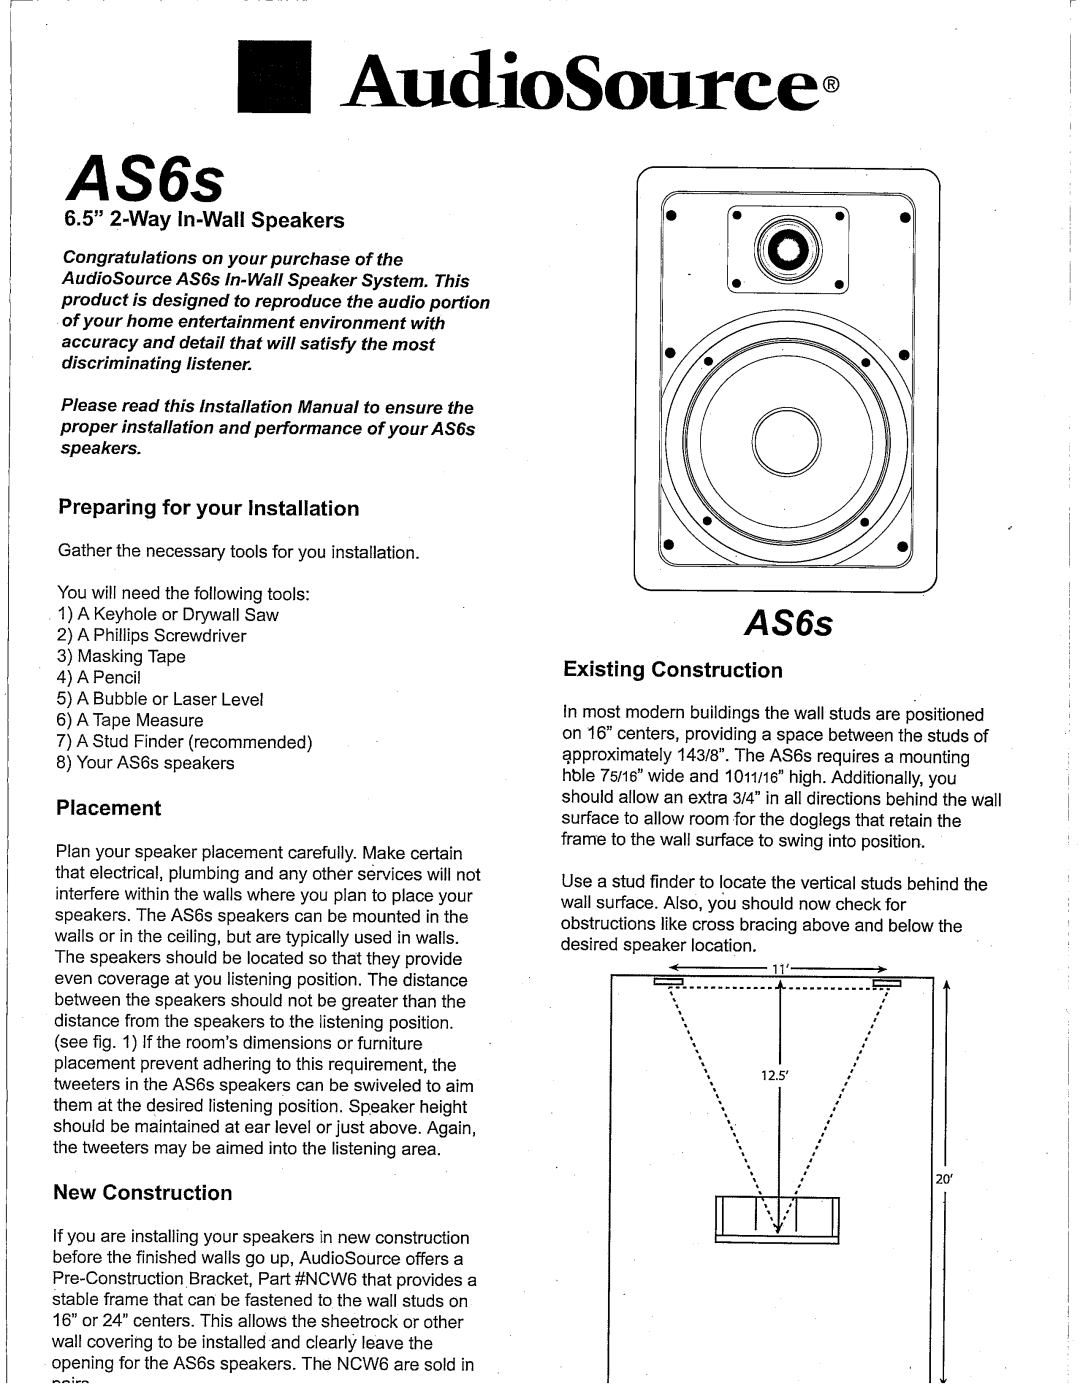 AudioSource AudioSource 6.5" 2-Way In-Wall Speaker System installation manual AS6s, 6.5” 2-Way In-WallSpeakers, Placement 